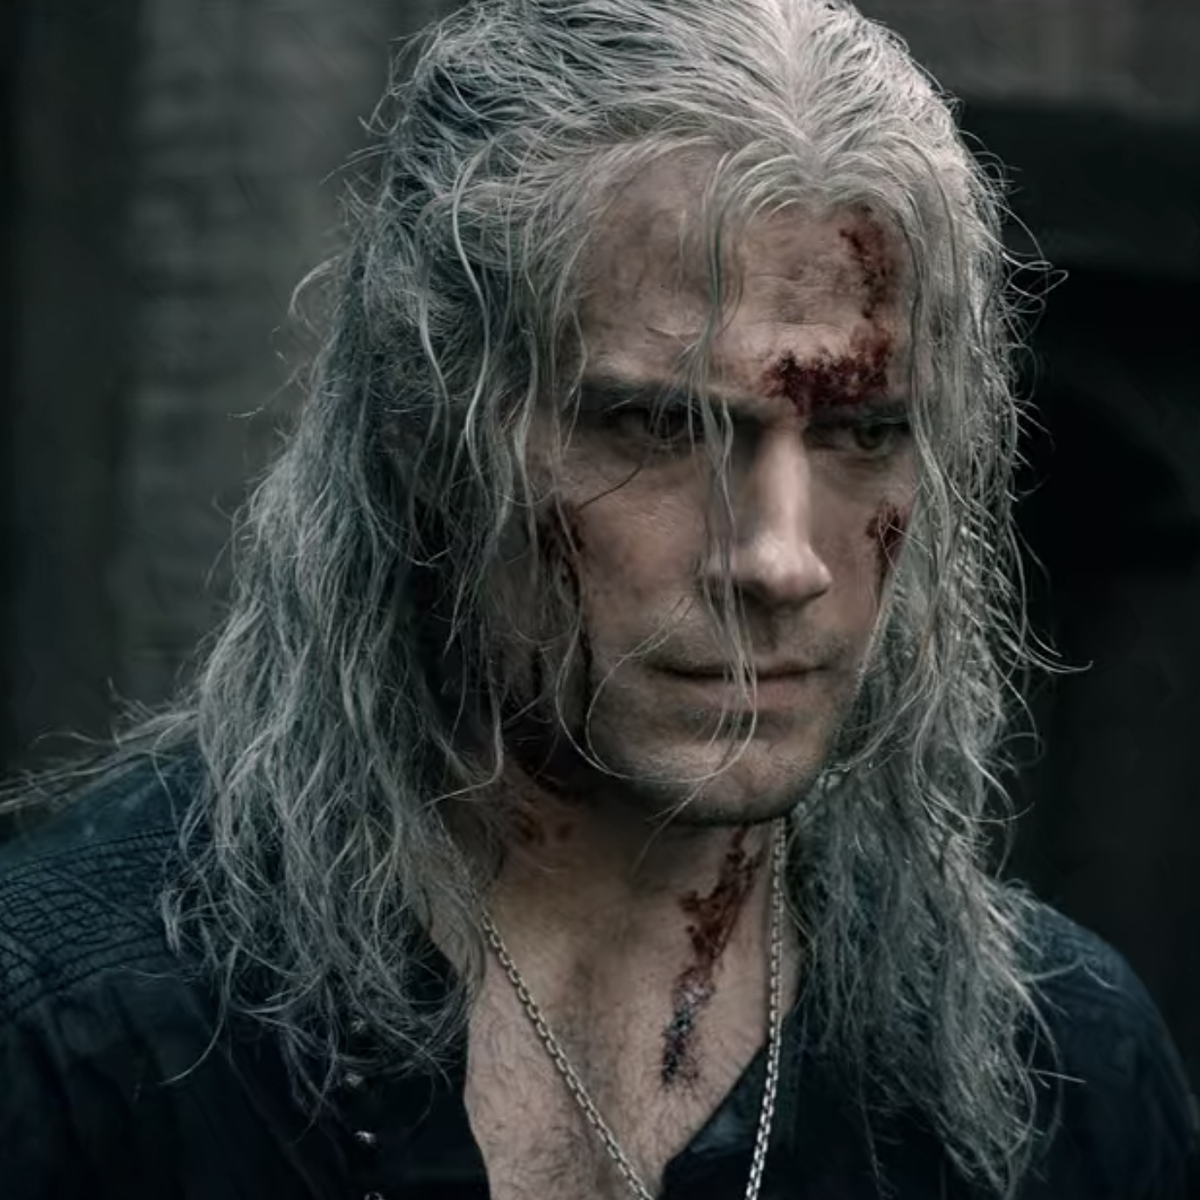 The Witcher' Series Review - Hottest Geralt of Rivia Scenes